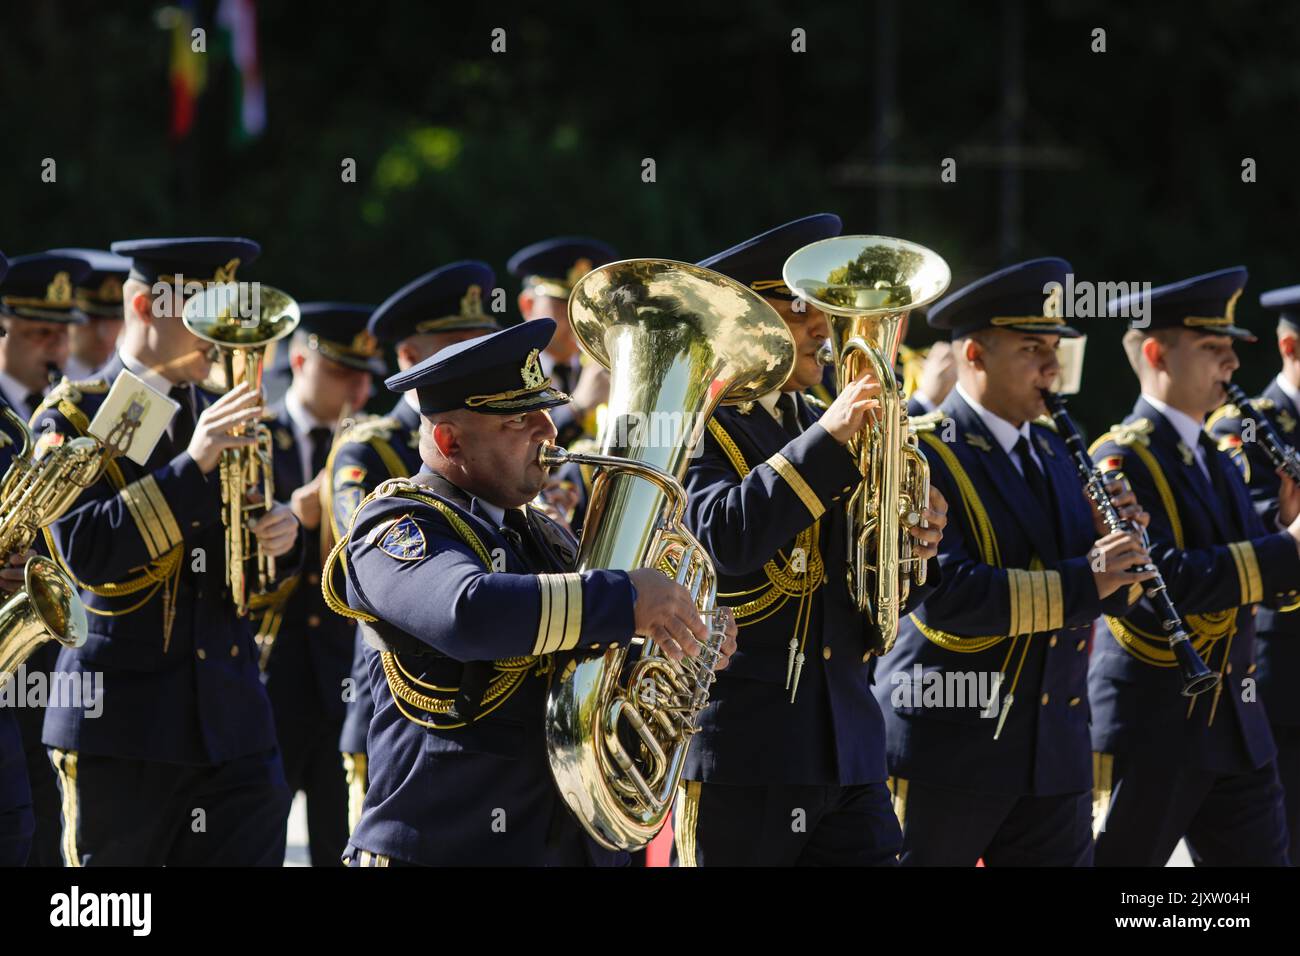 Bucharest, Romania - September 7, 2022: Romanian military band playing during a ceremony. Stock Photo